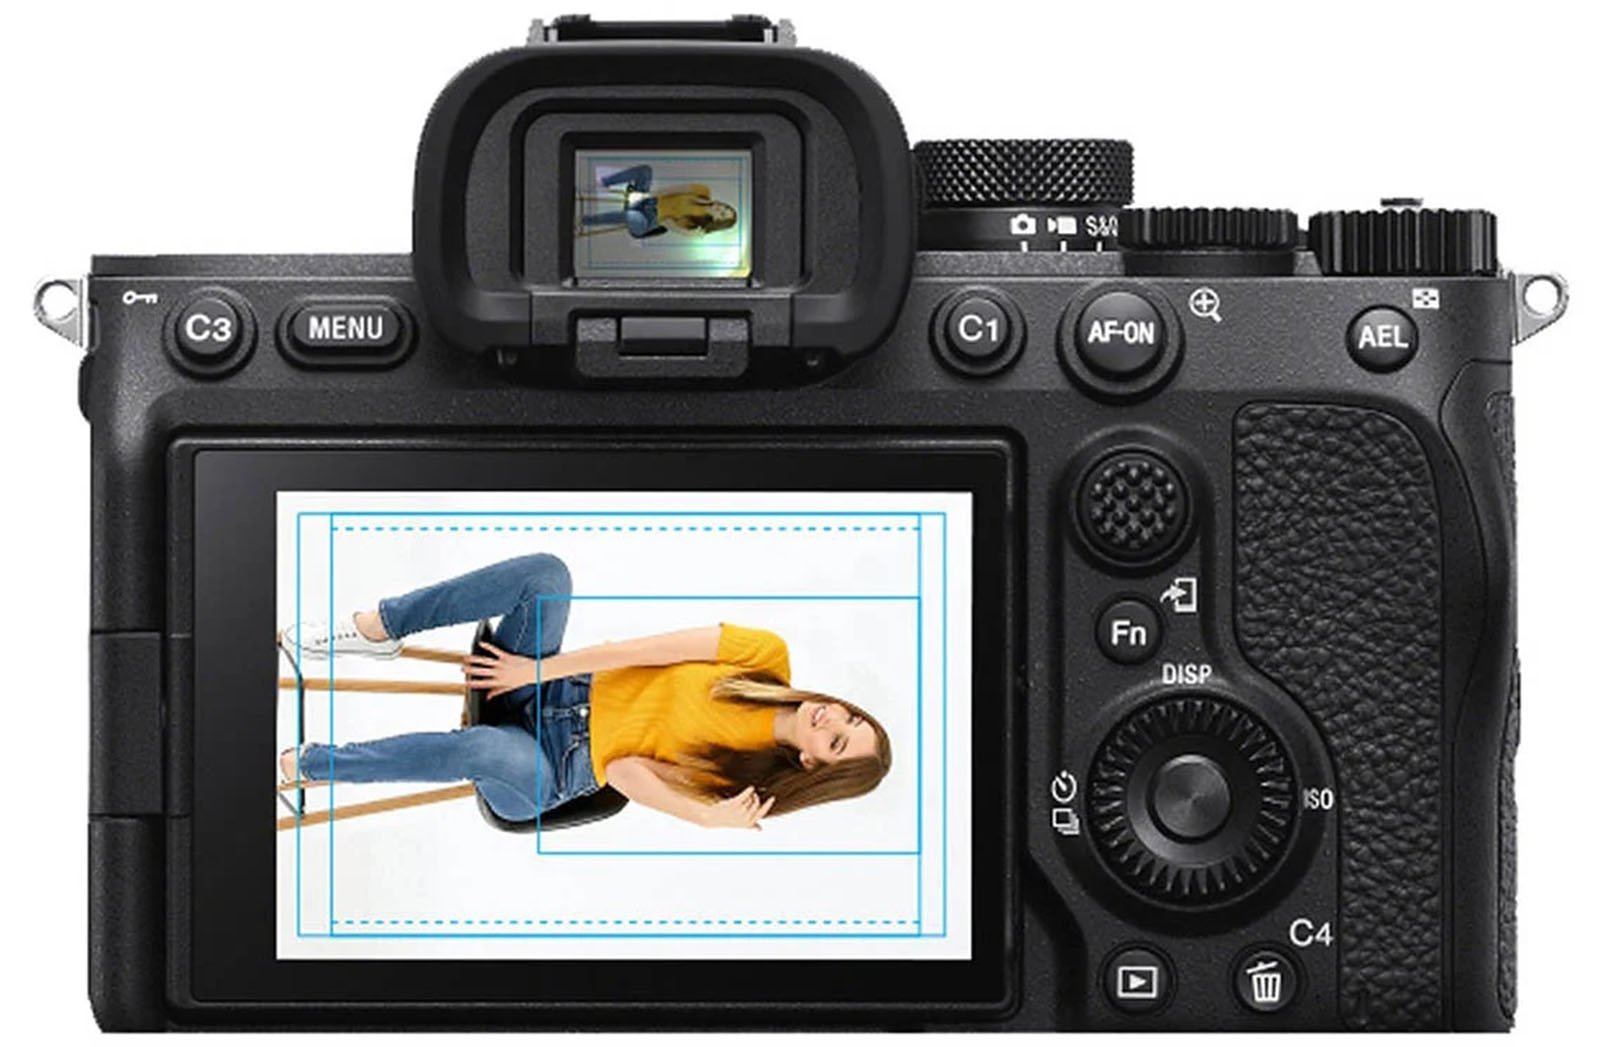 Rear view of a digital camera displaying its screen, which shows a photo of a smiling woman sitting on a stool, wearing a yellow top and jeans.  Various camera buttons are also visible.